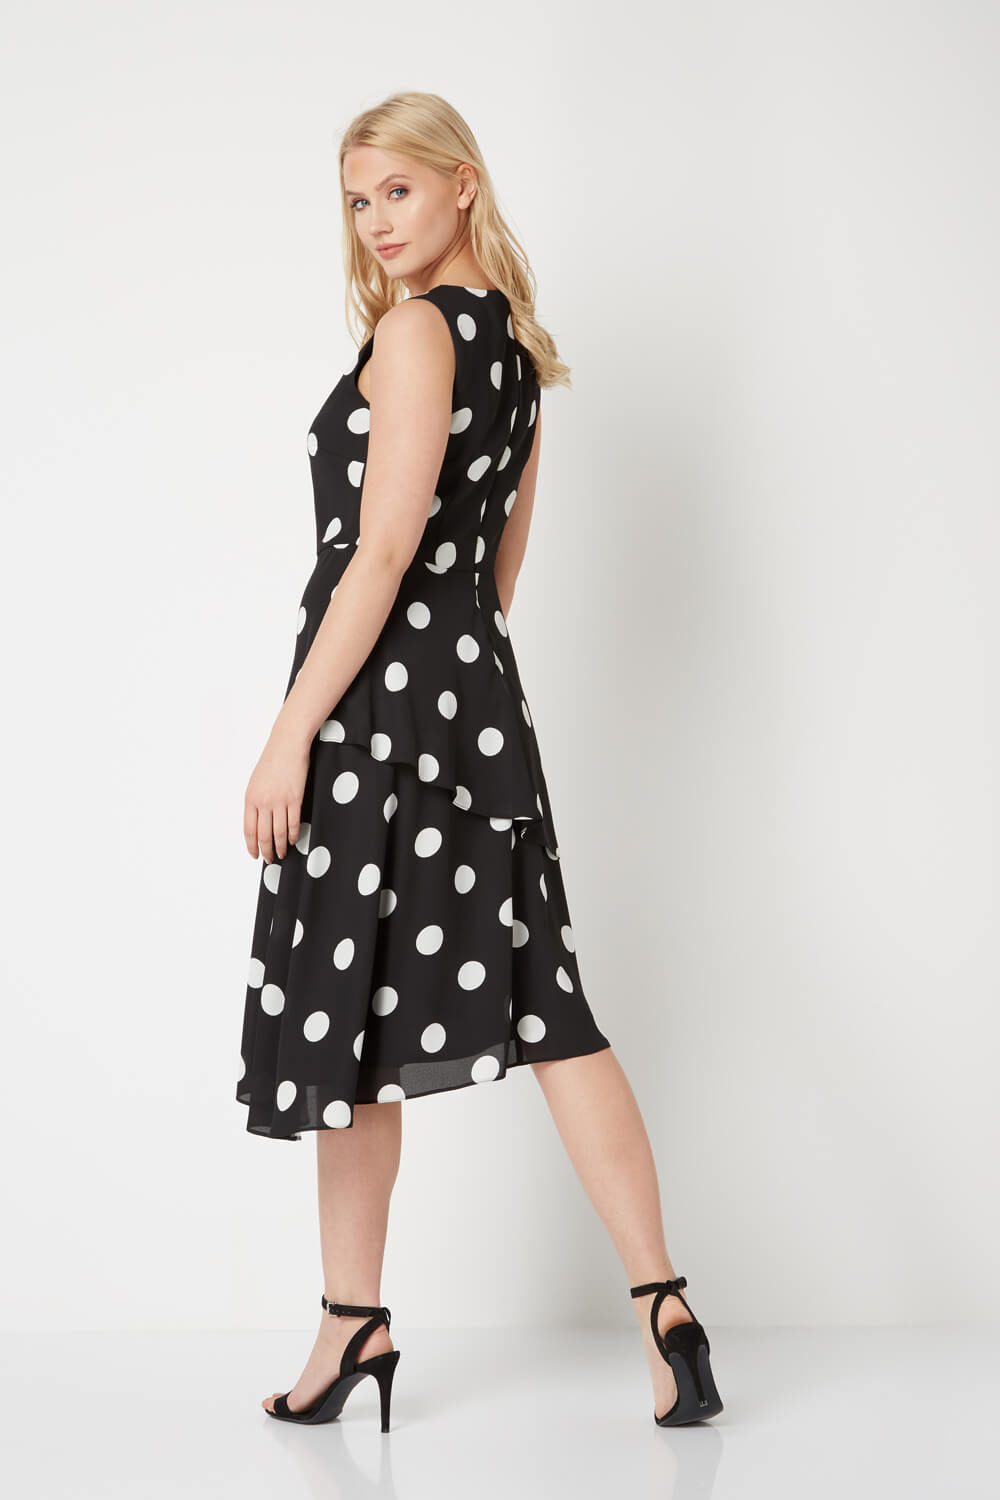 Black Spot Print Fit and Flare Dress, Image 3 of 5